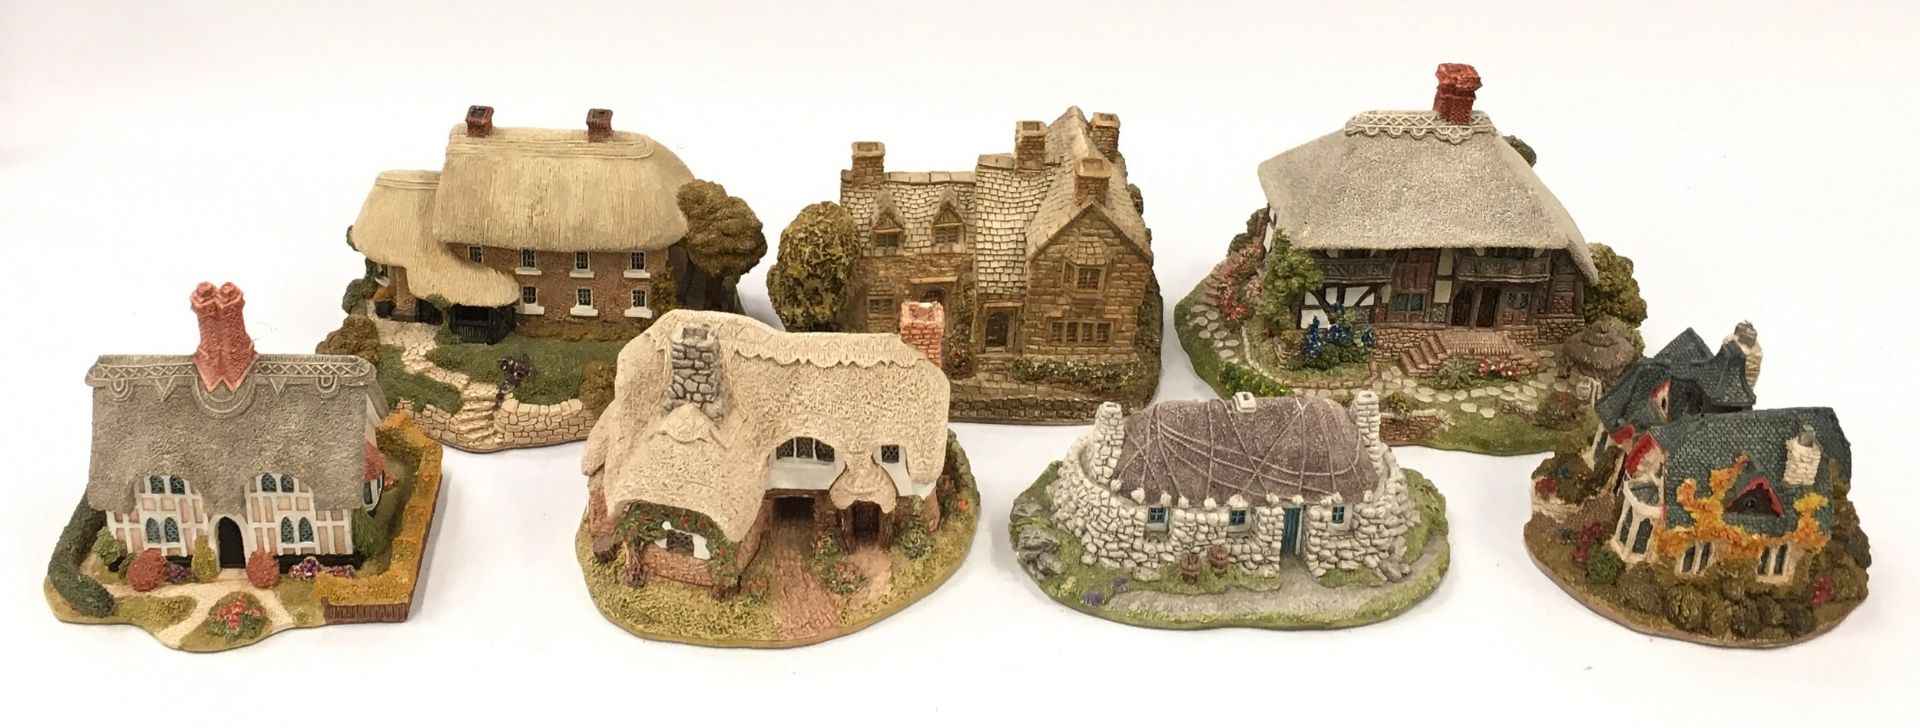 Lilliput Lane collection to include Hopcroft Cottage and Ostlers Keep (7).